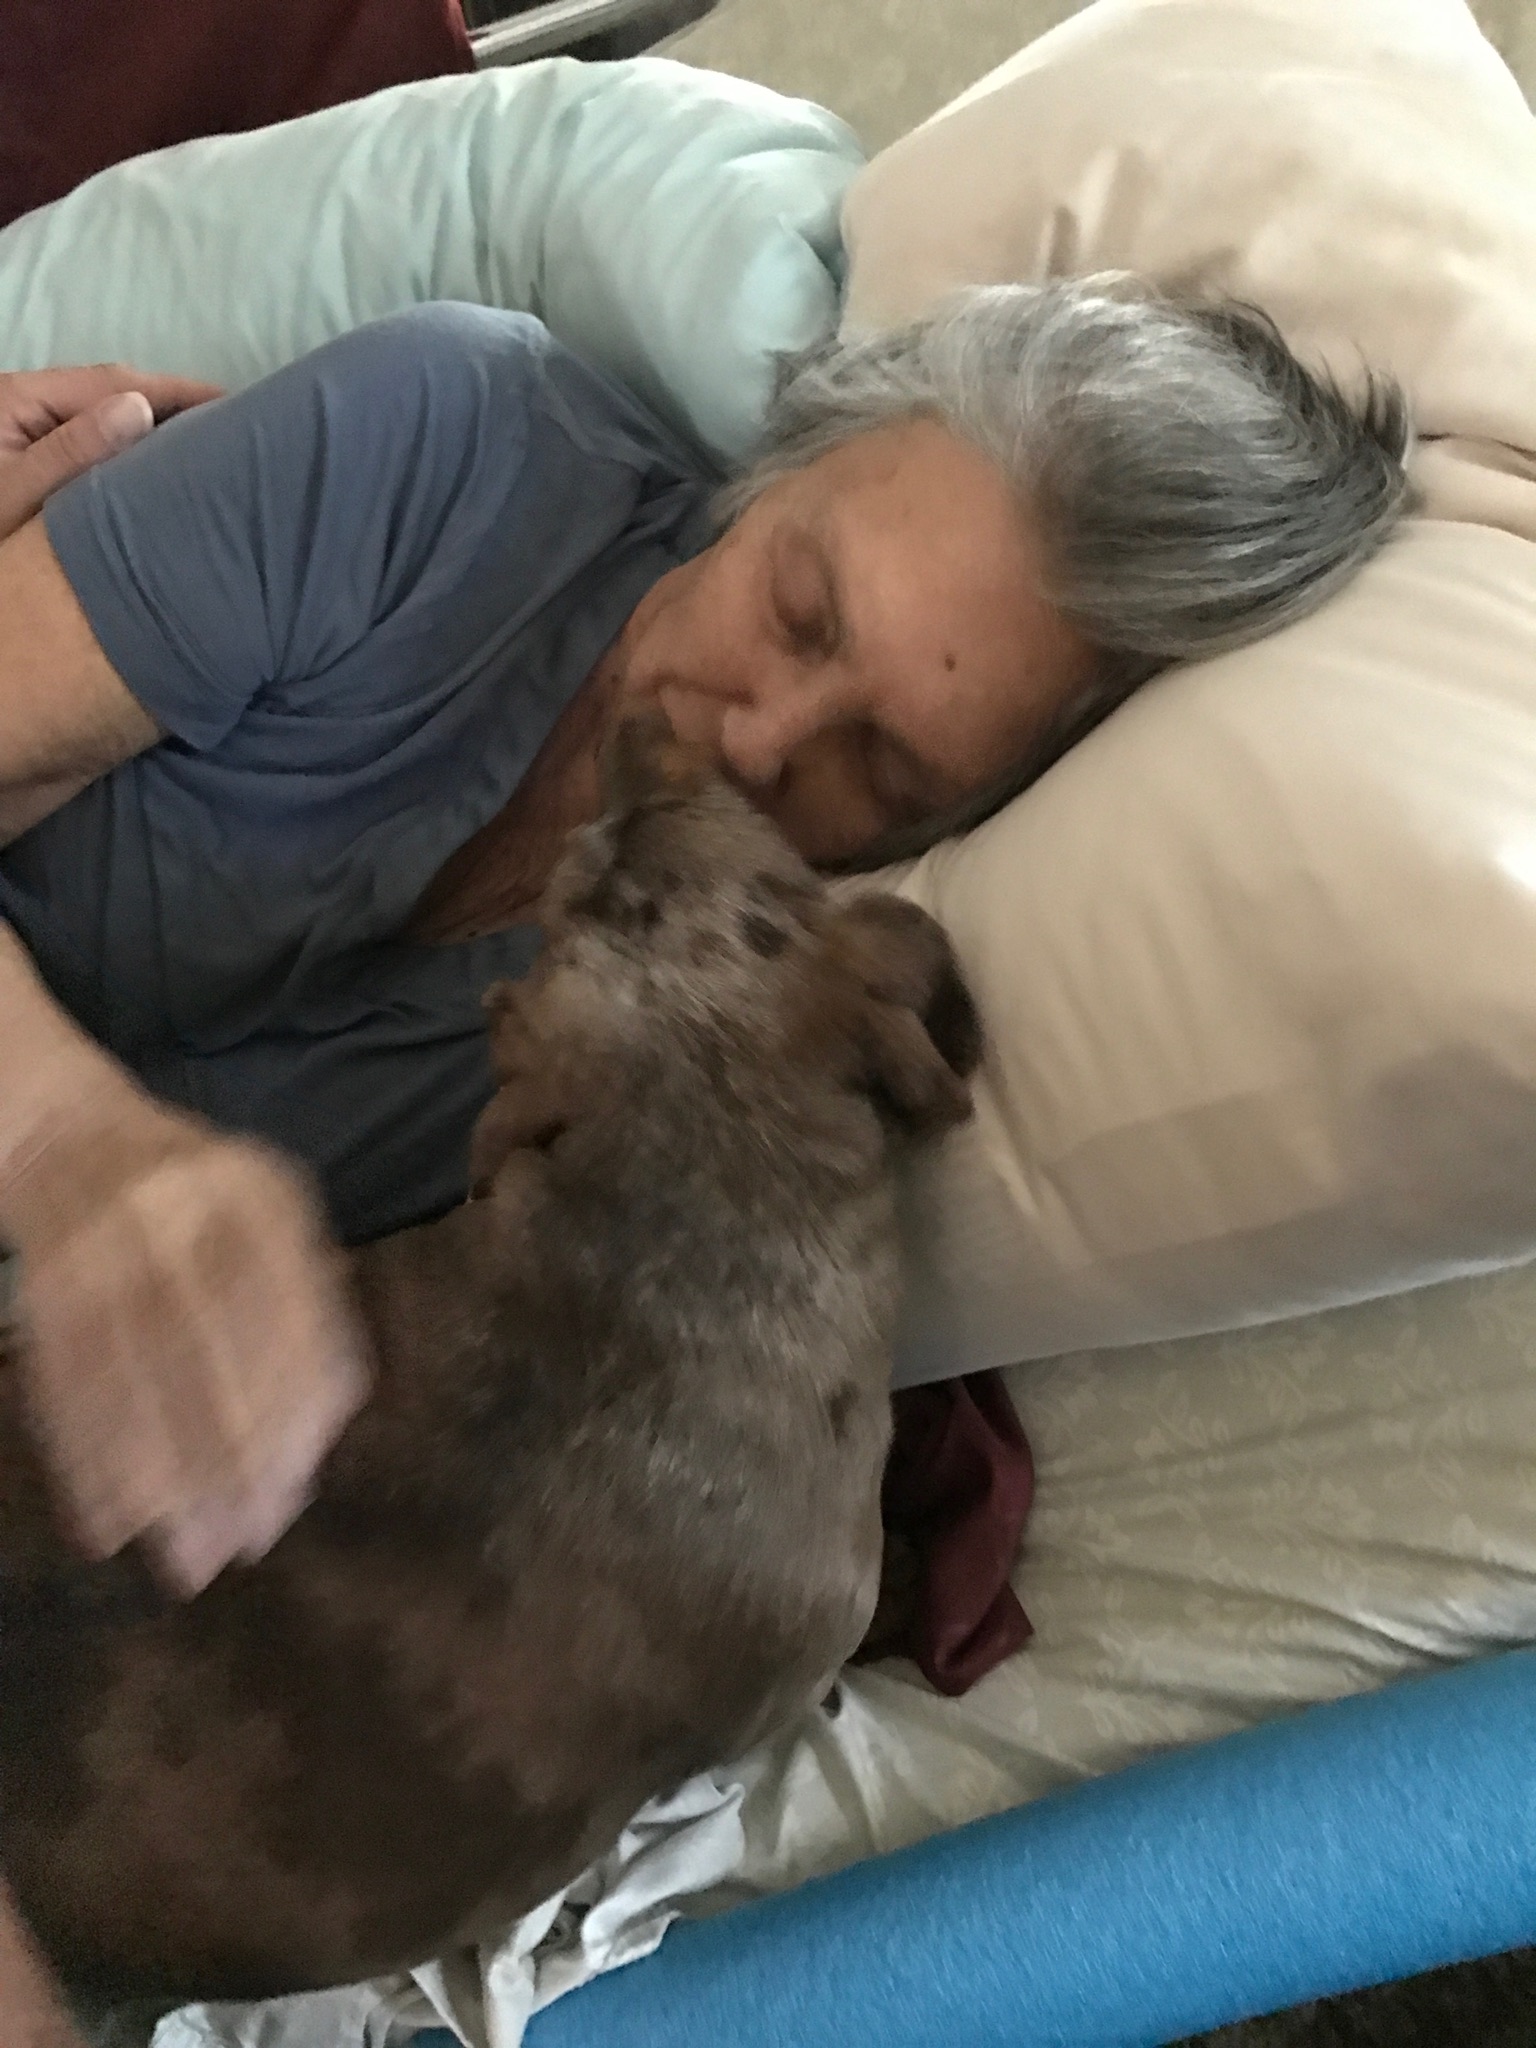 Mom with her best friend and protector, she sure loved her little peanut